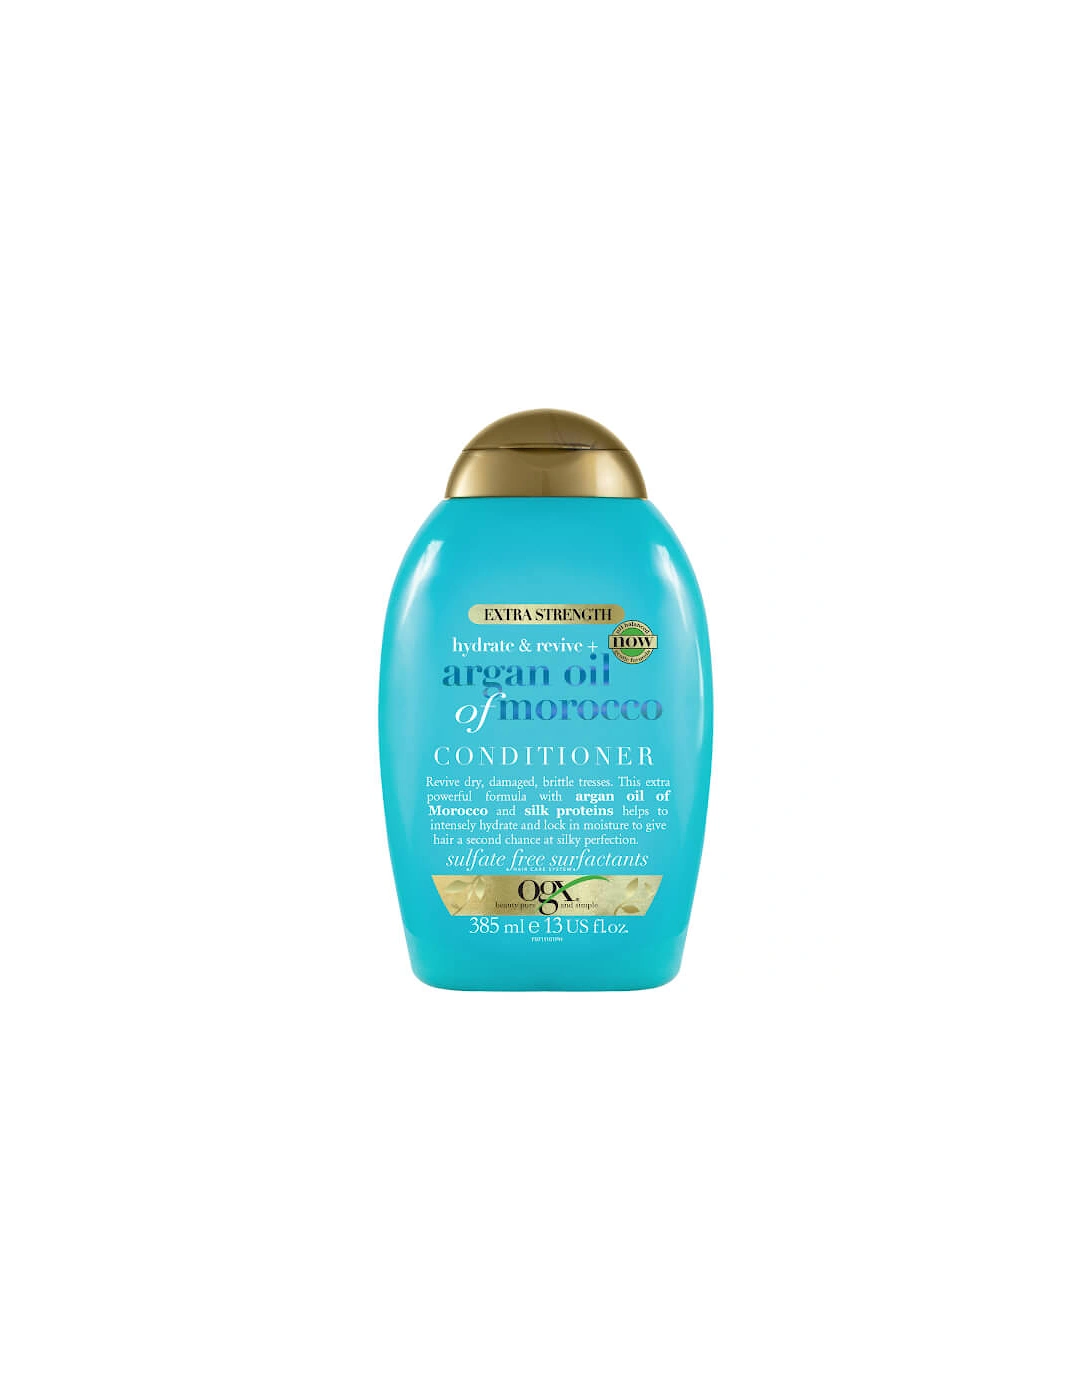 Extra Strength Renewing+ Argan Oil of Morocco Conditioner 385ml, 2 of 1